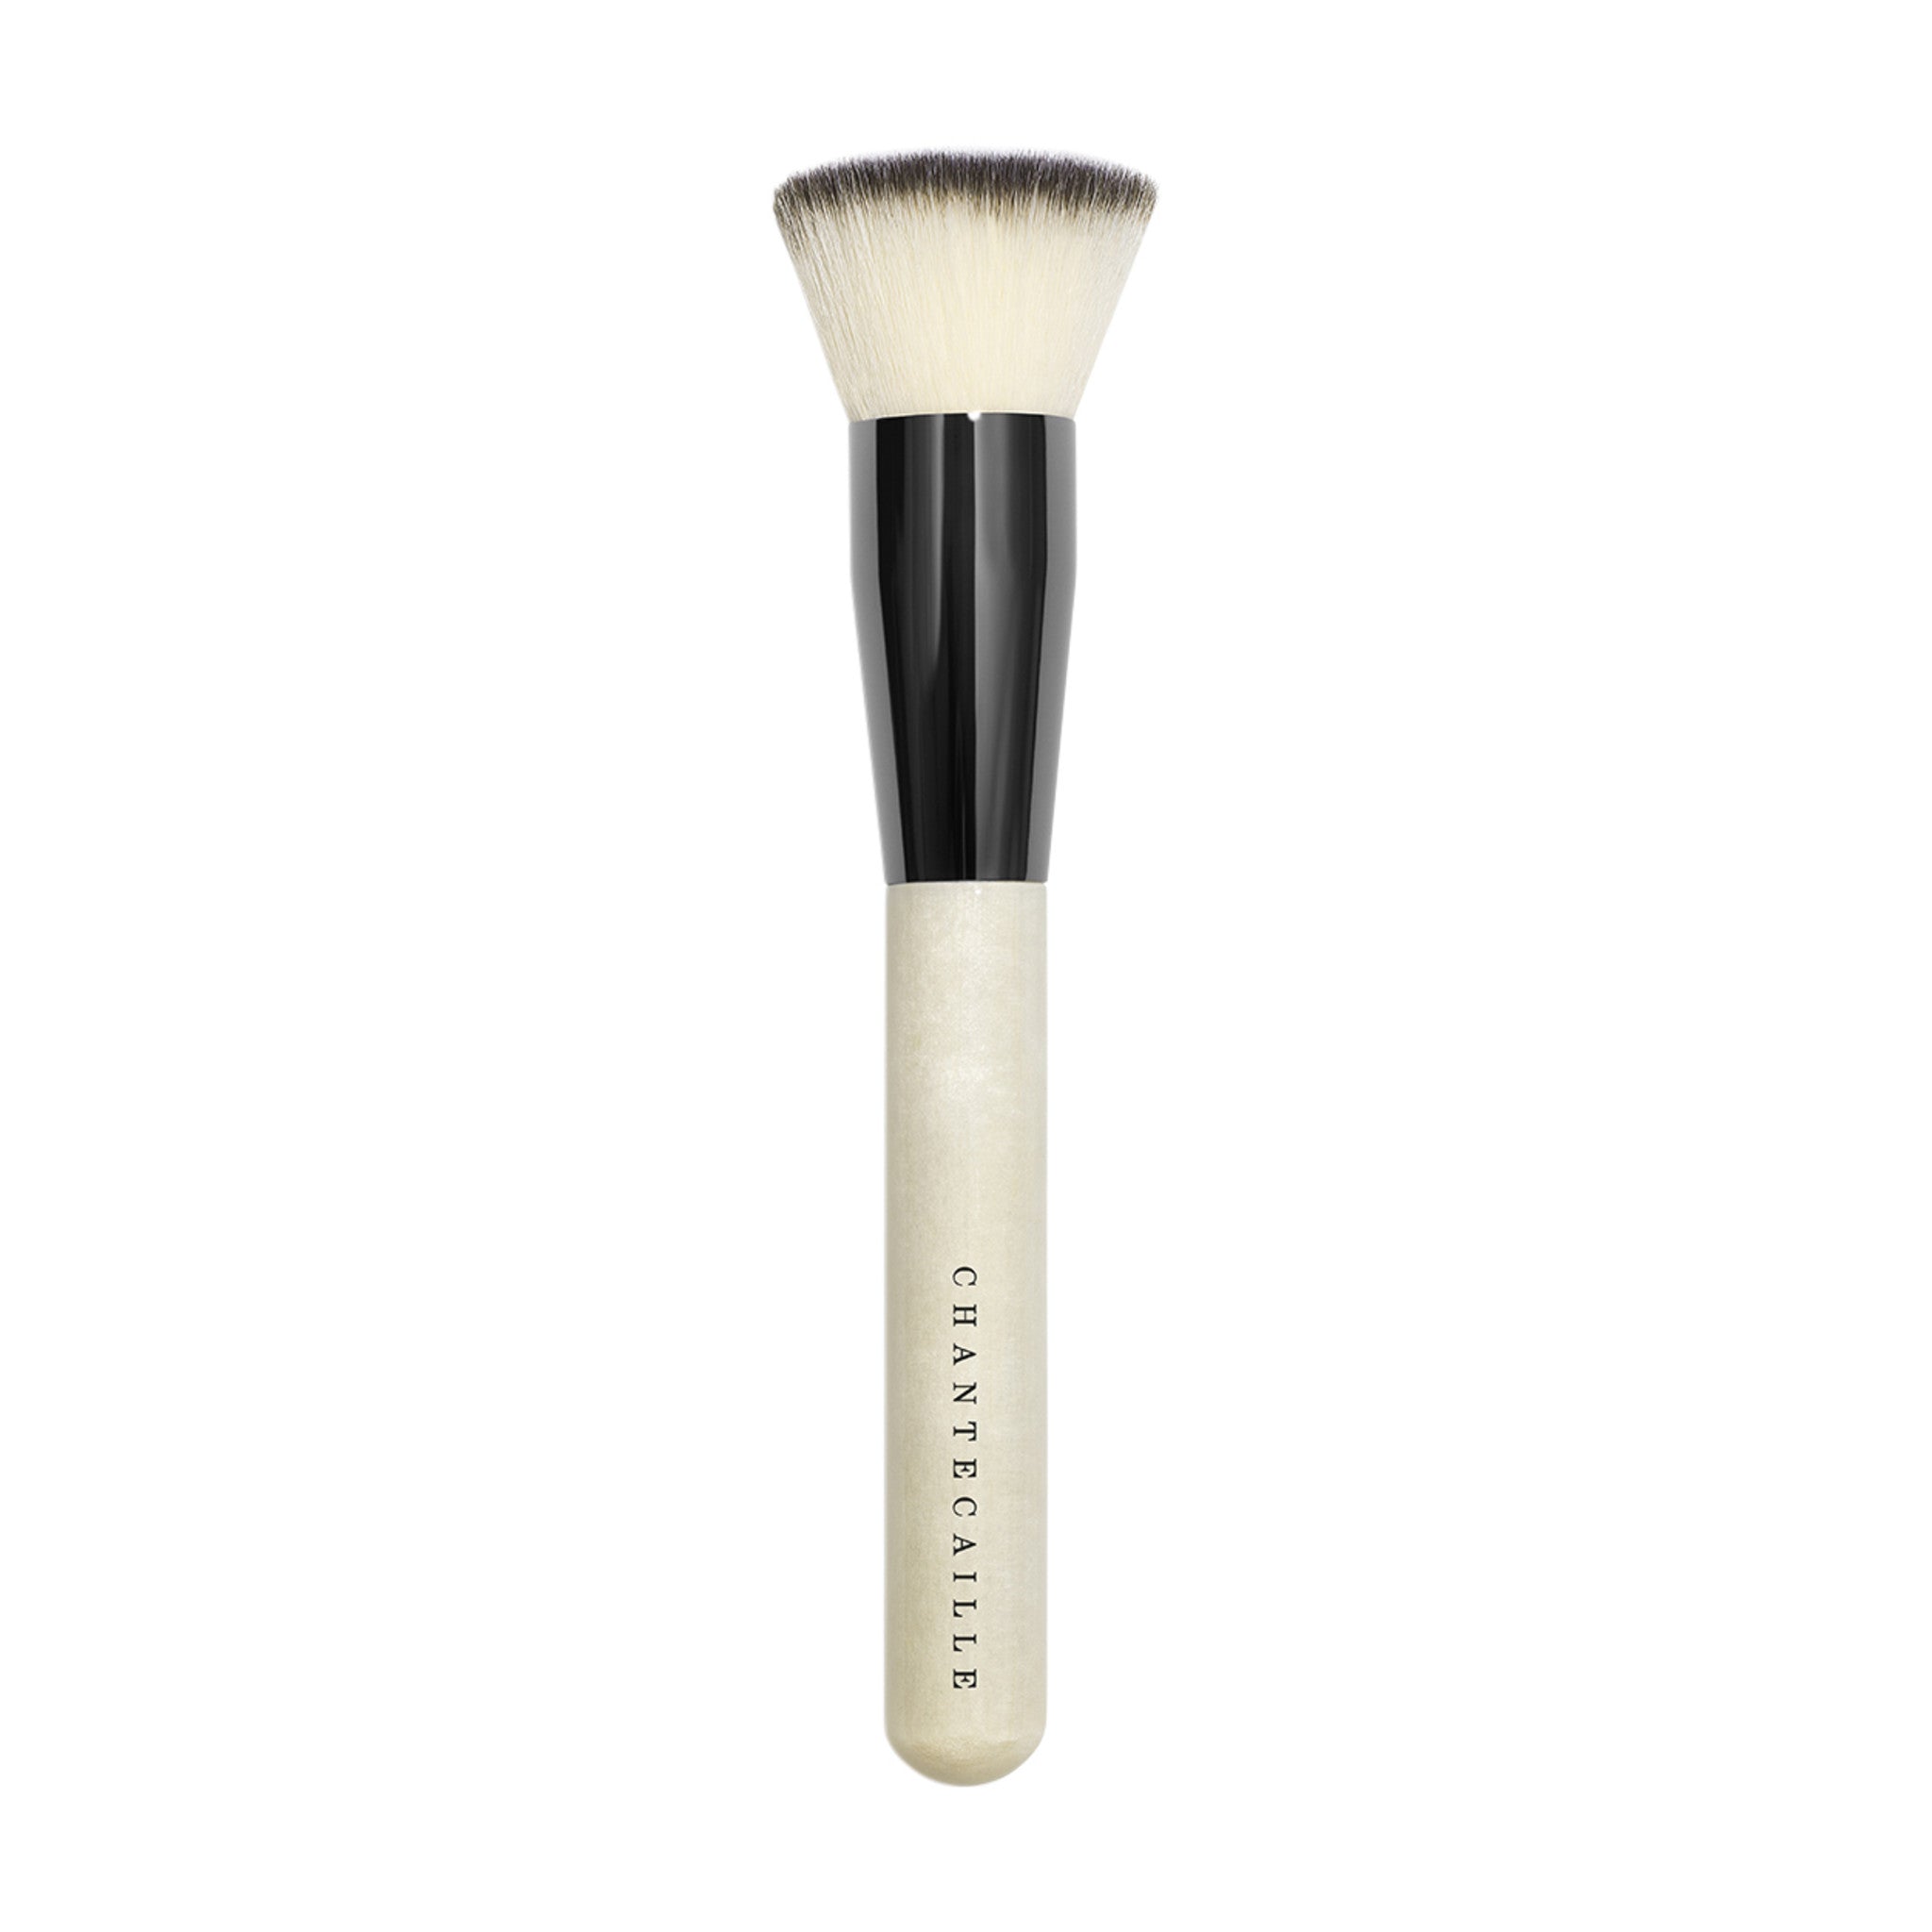 Chantecaille Buff and Blur Brush Size variant: Full Size main image.